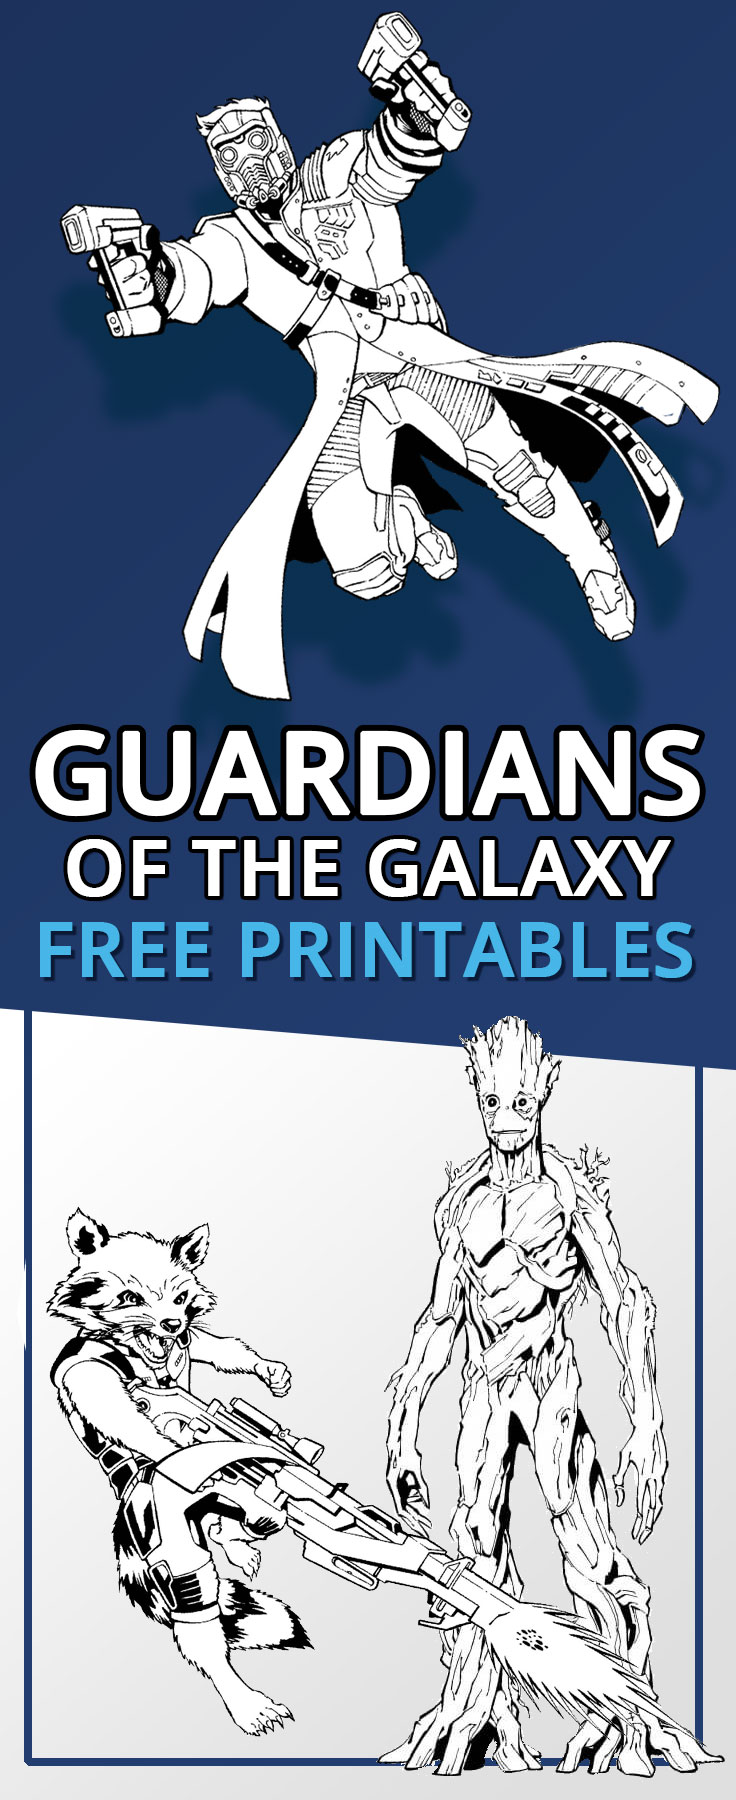 Guardians of the printables FREE Galaxy